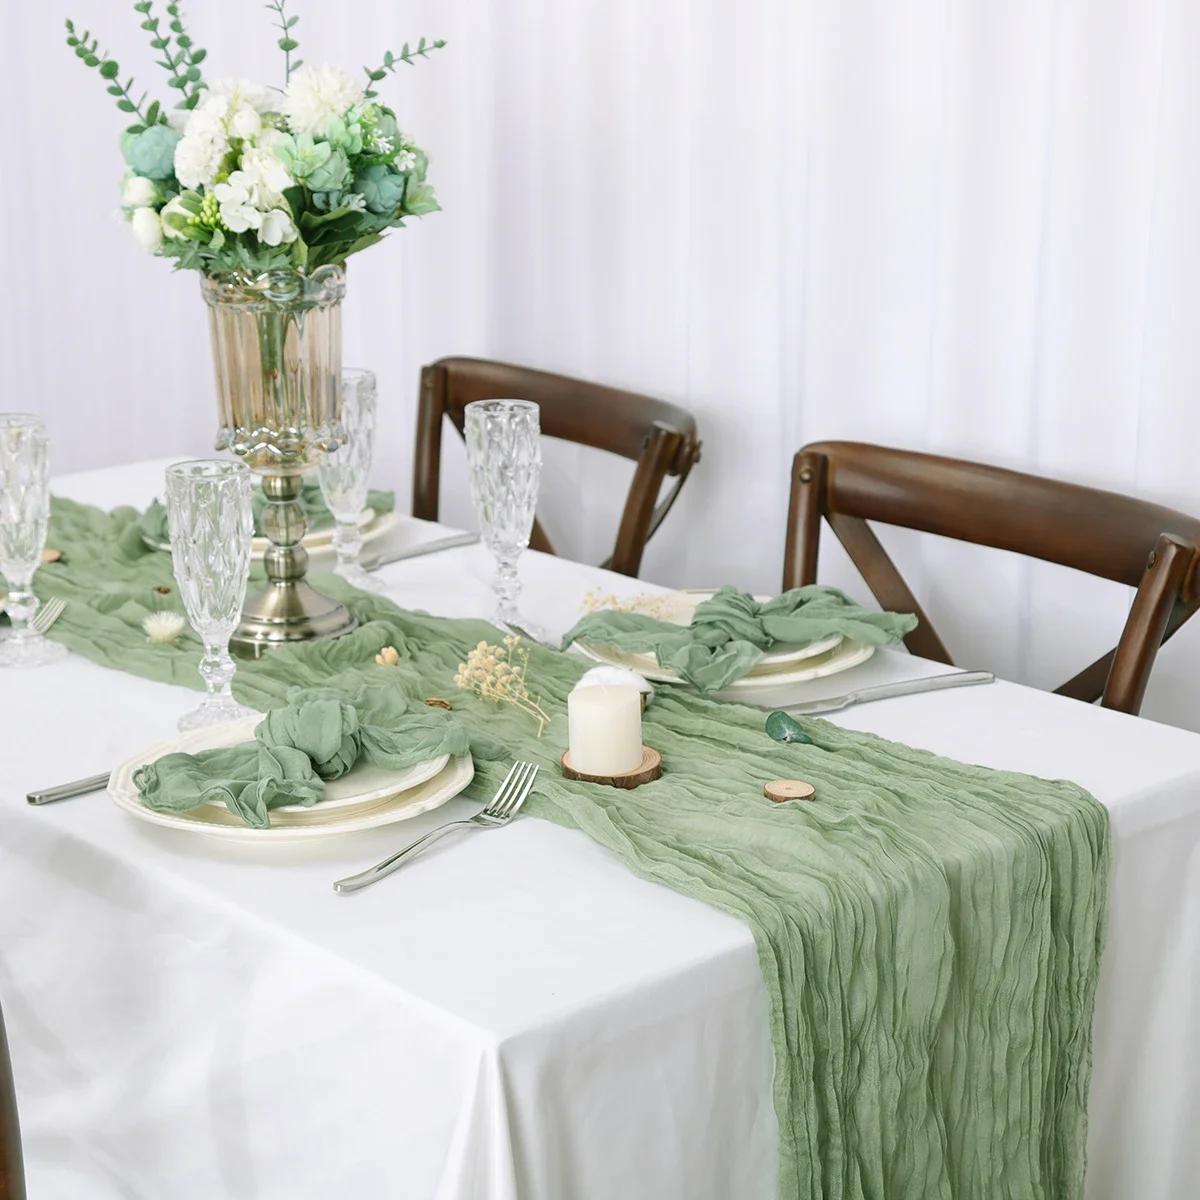 1pcs Sage Green Gauze Table Runner Decoration Rustic Country Boho Beach Wedding Party Christmas Thanksgiving Easter